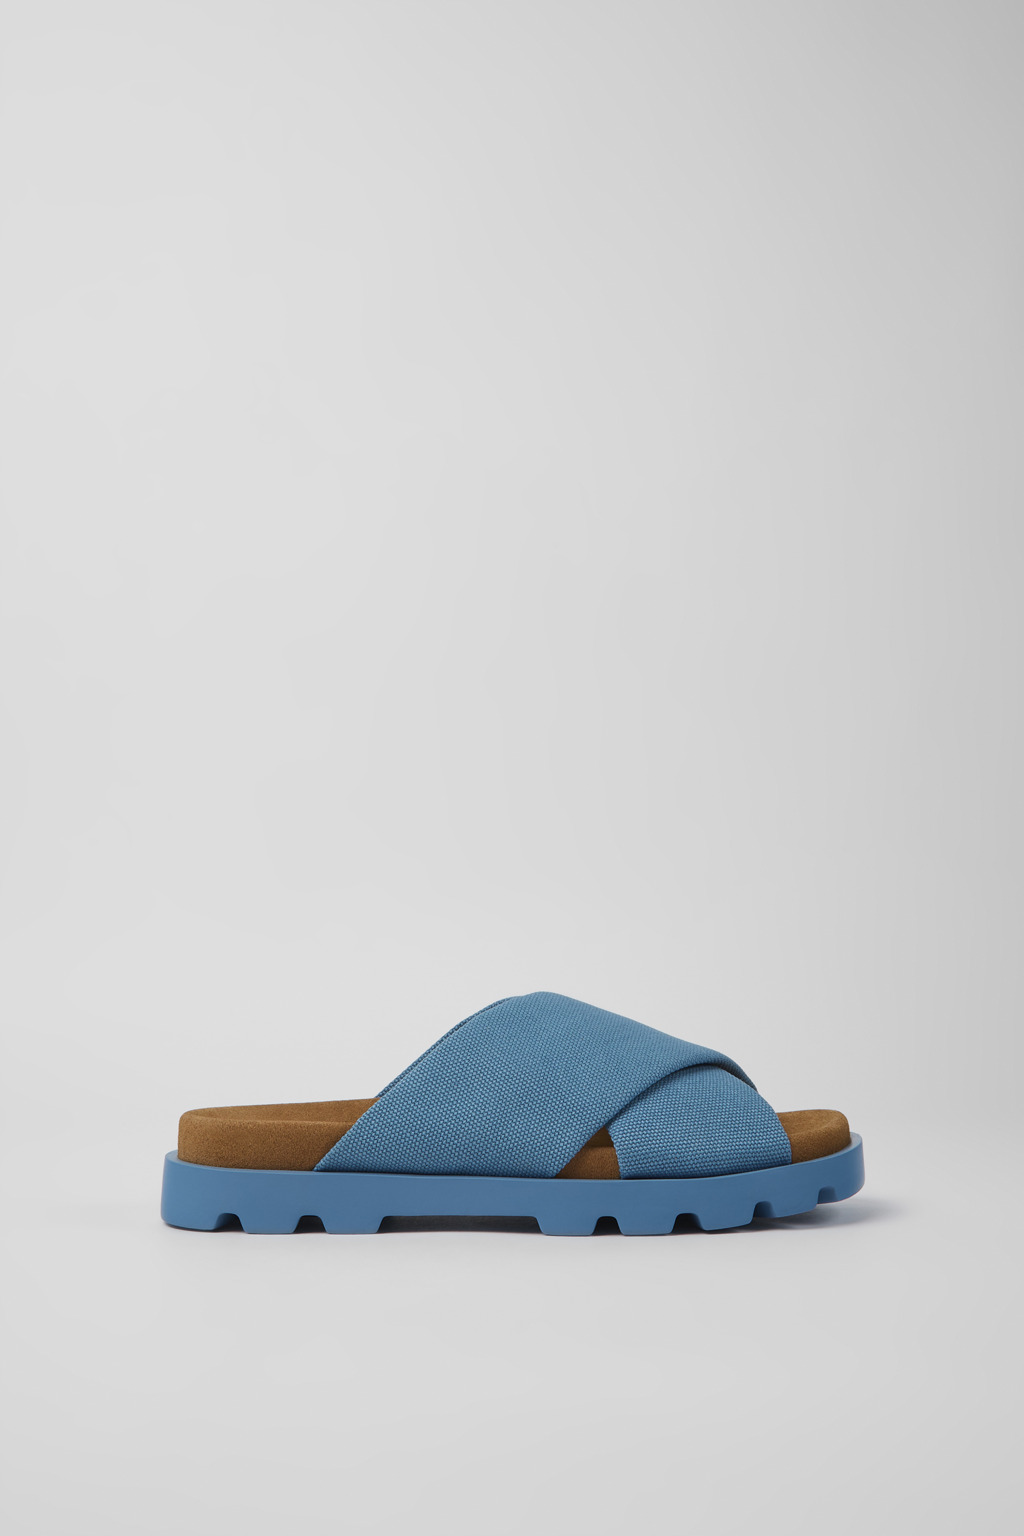 Brutus Blue Sandals for Women - Fall/Winter collection - Camper USA